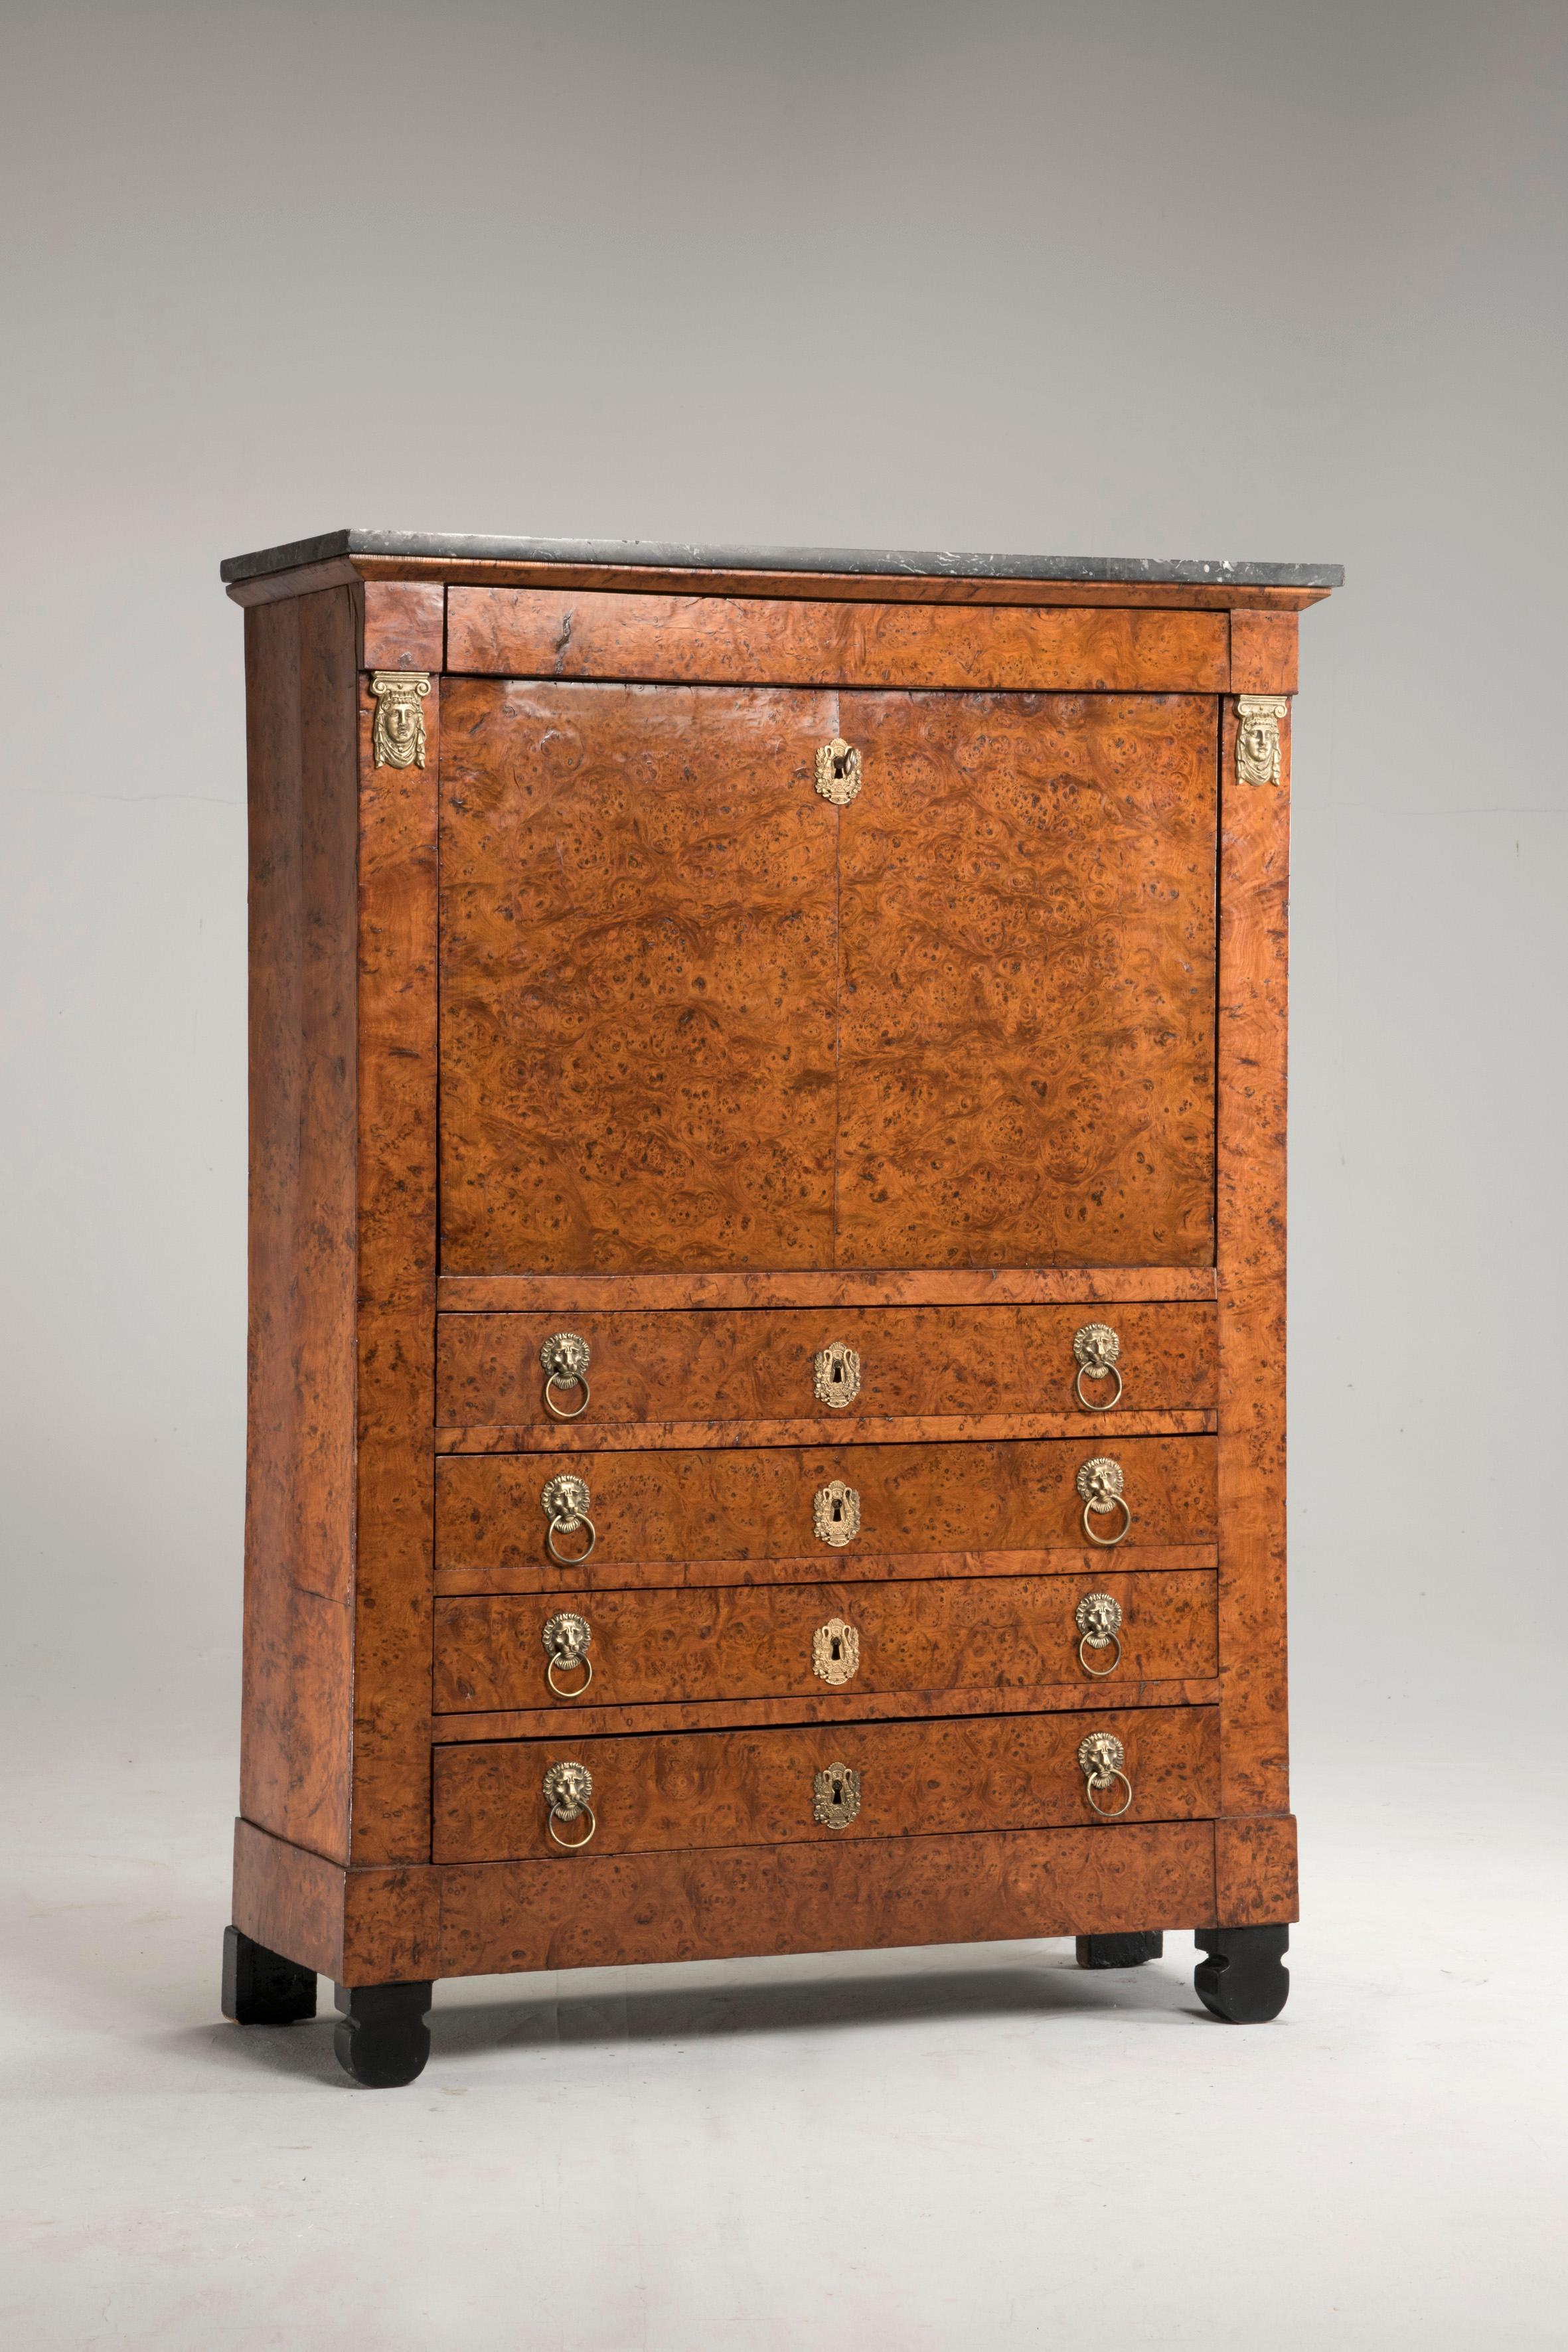 19th century Empire French Elm Briar Secretaire, featuring a down drop door besides four drawers and original golden bronze handles and hardware. 
The inner part is organized with some small drawers and the drop down inner door is covered with